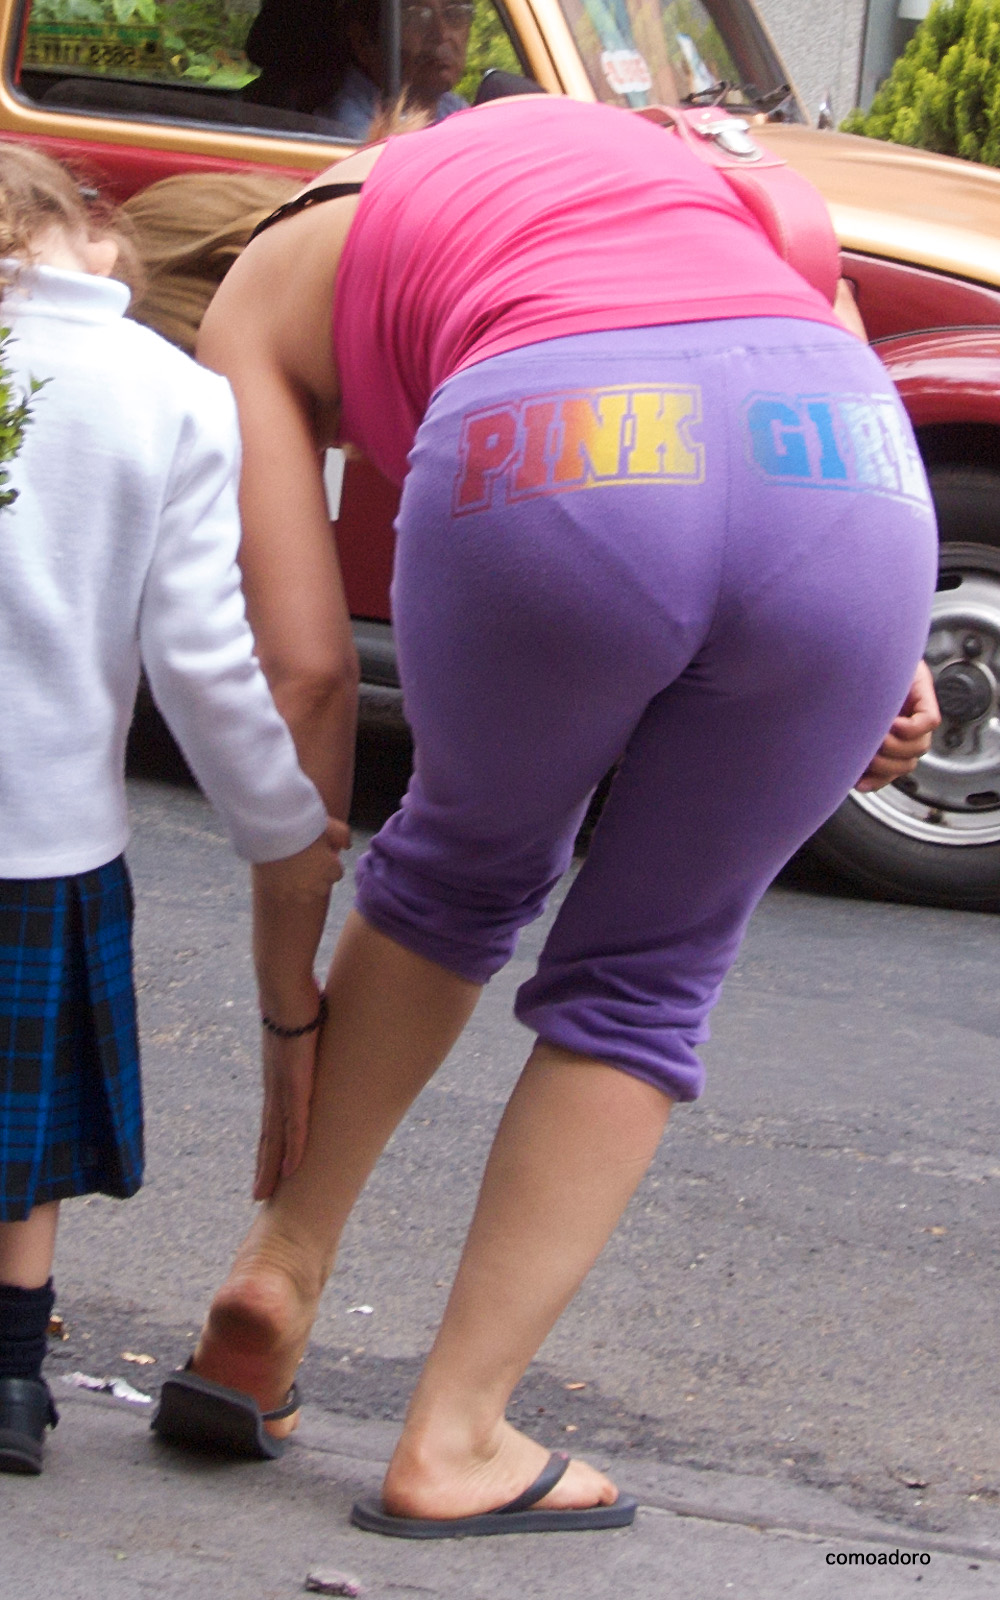 Mature women walking on the street, visible panties line in tight yoga pant...